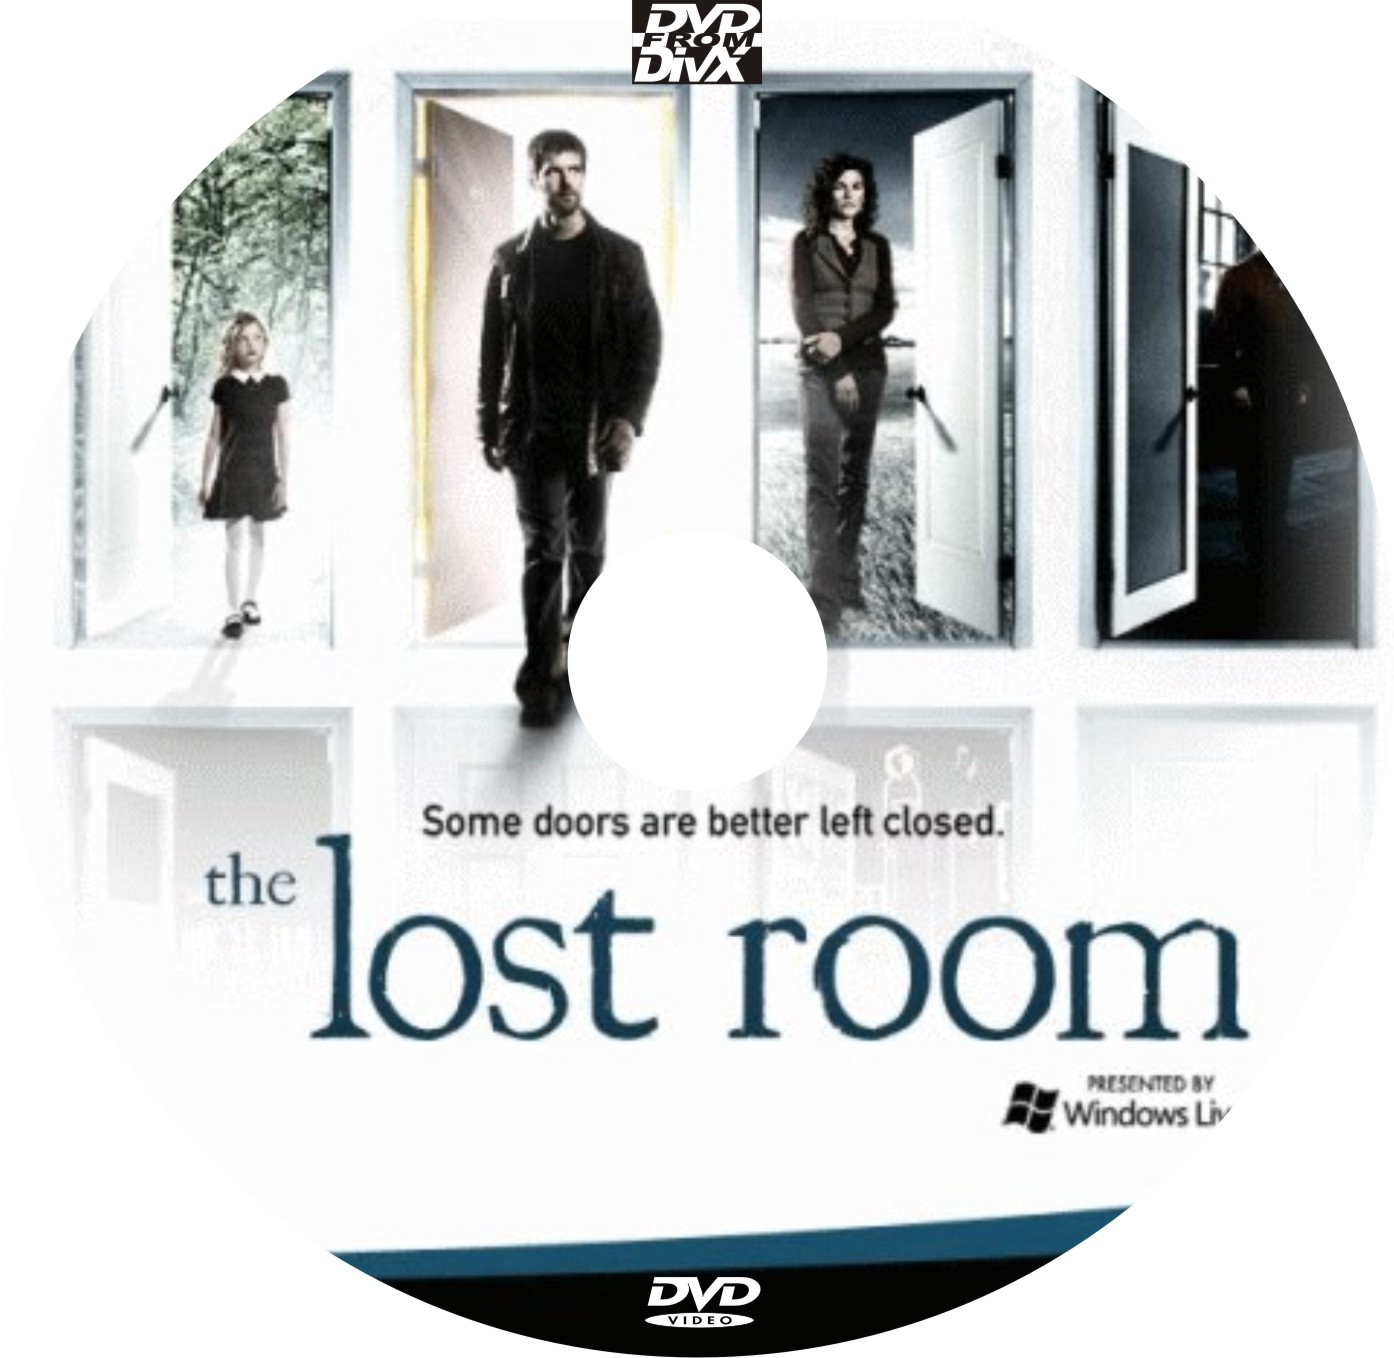 DVD_TheLostRoom_Cover.jpg